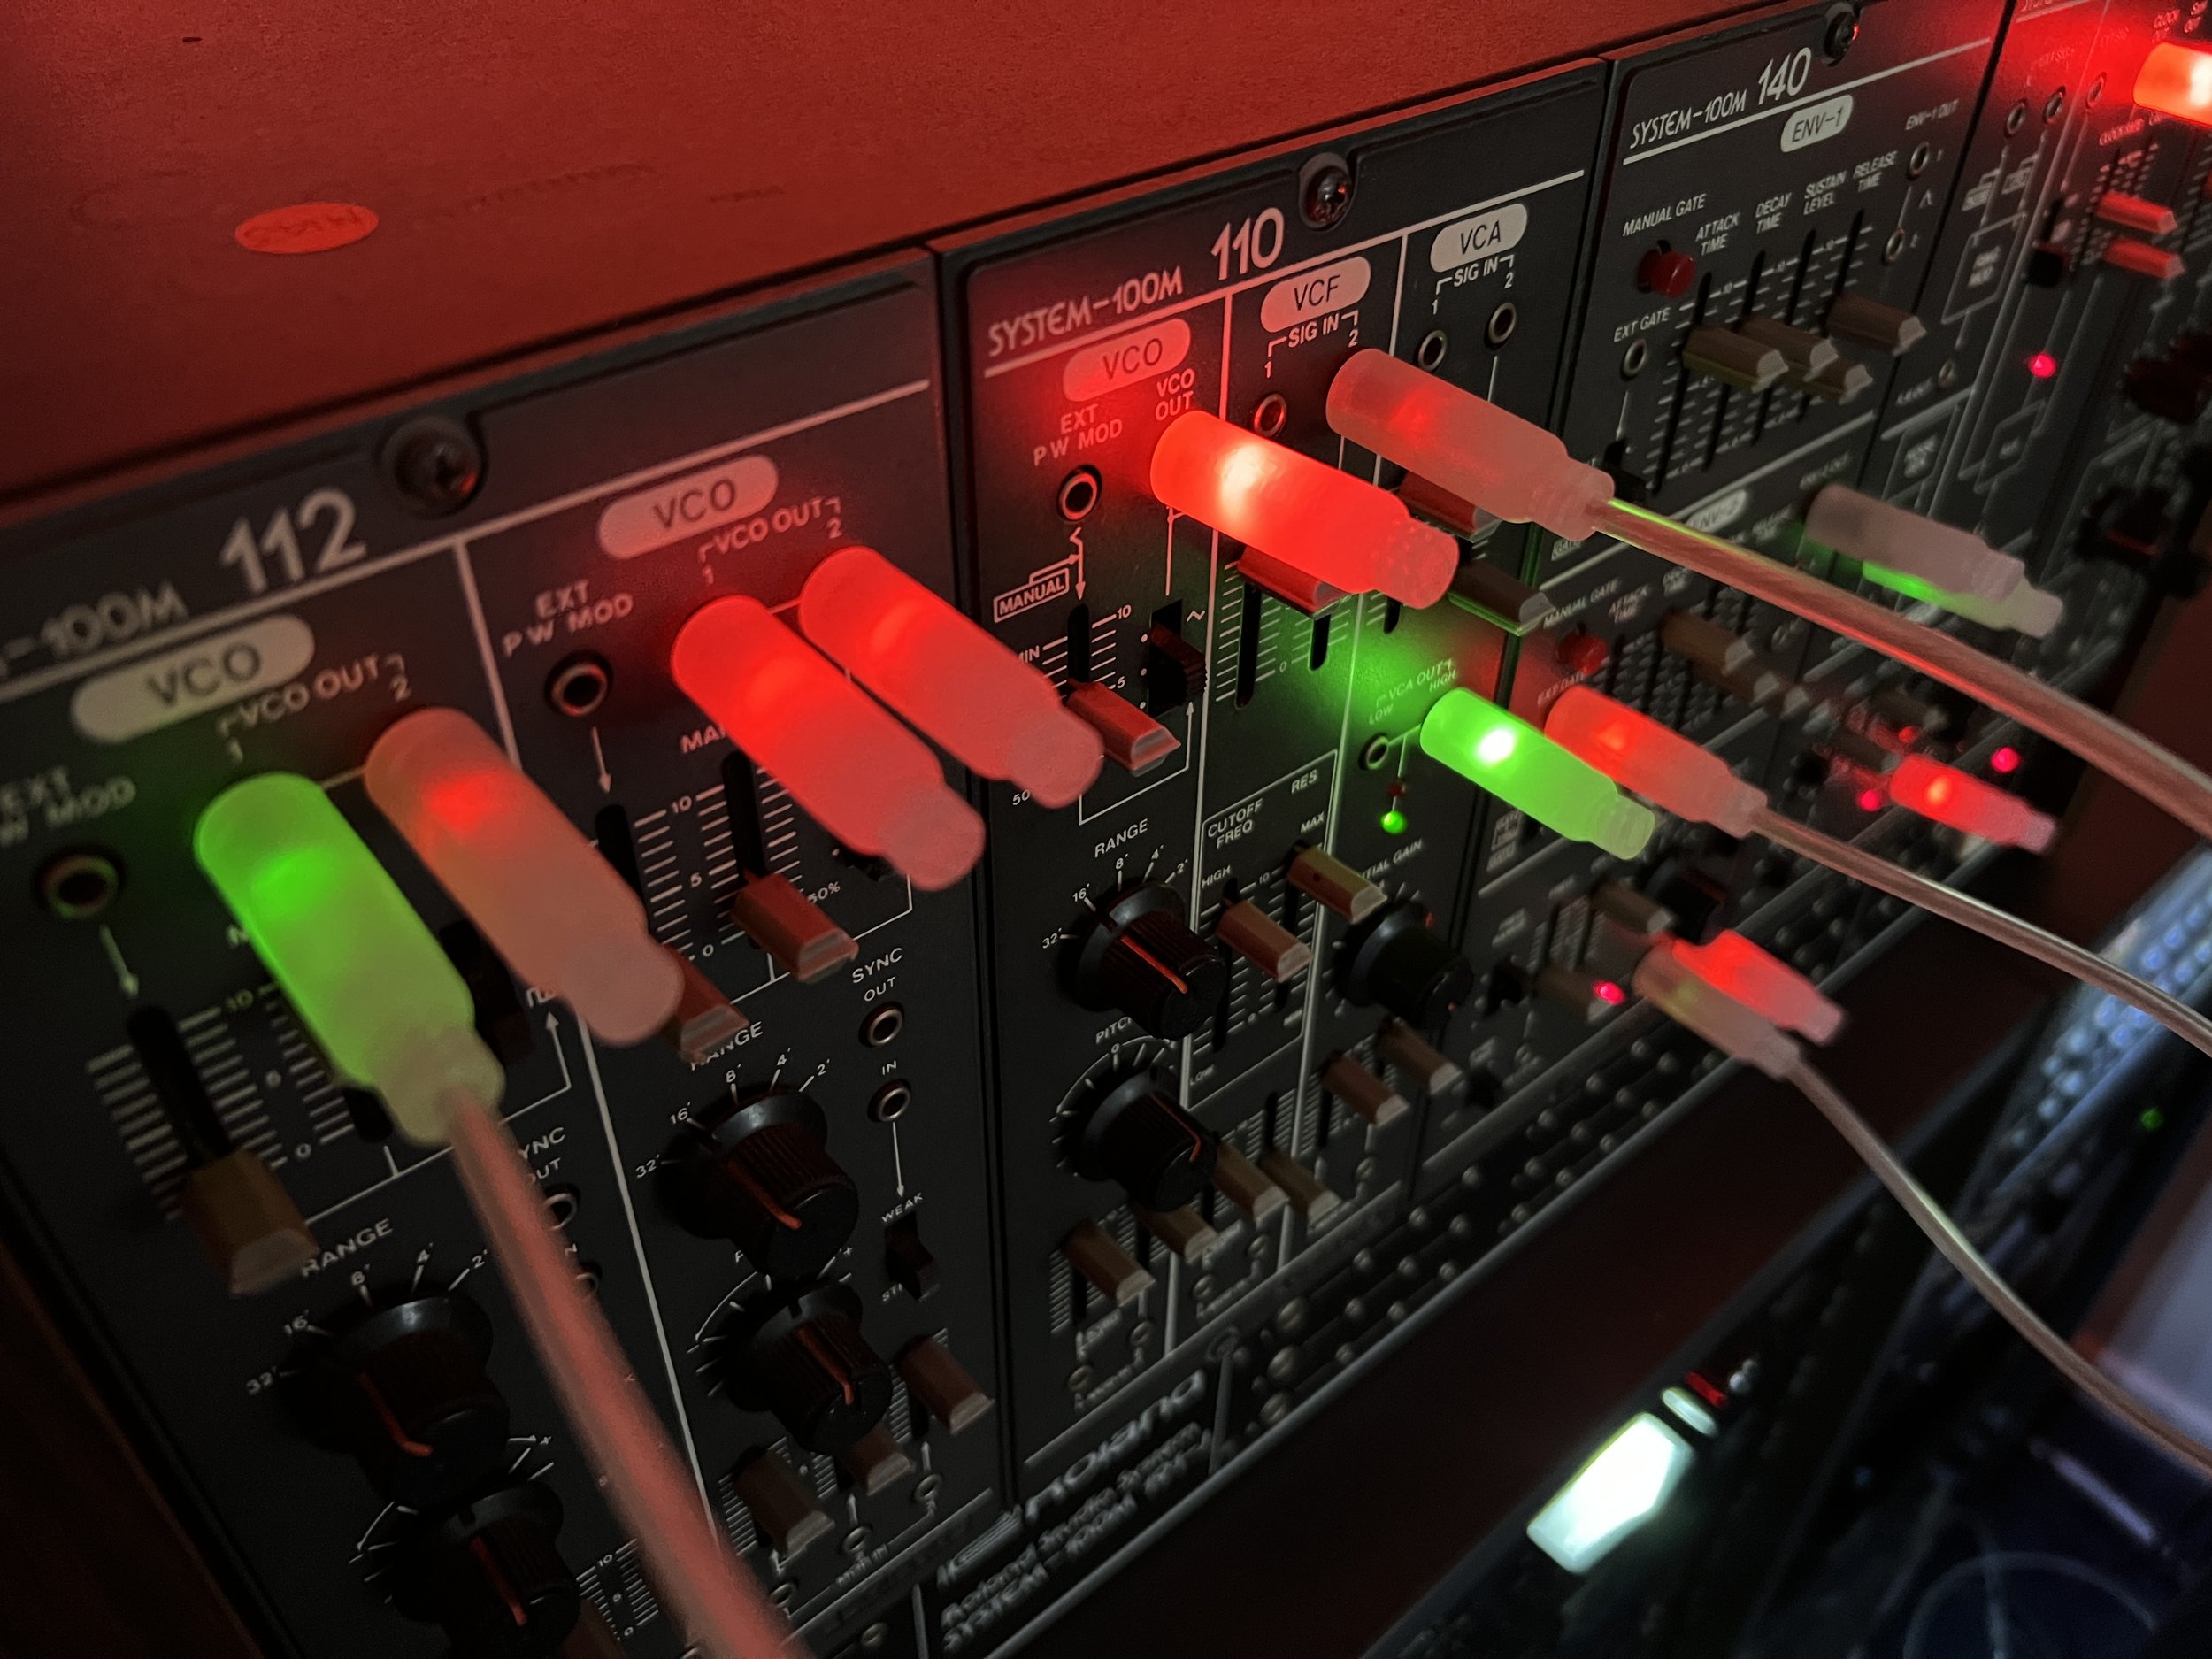 analogue solutions roland system 100m LED CV cables 1.JPG